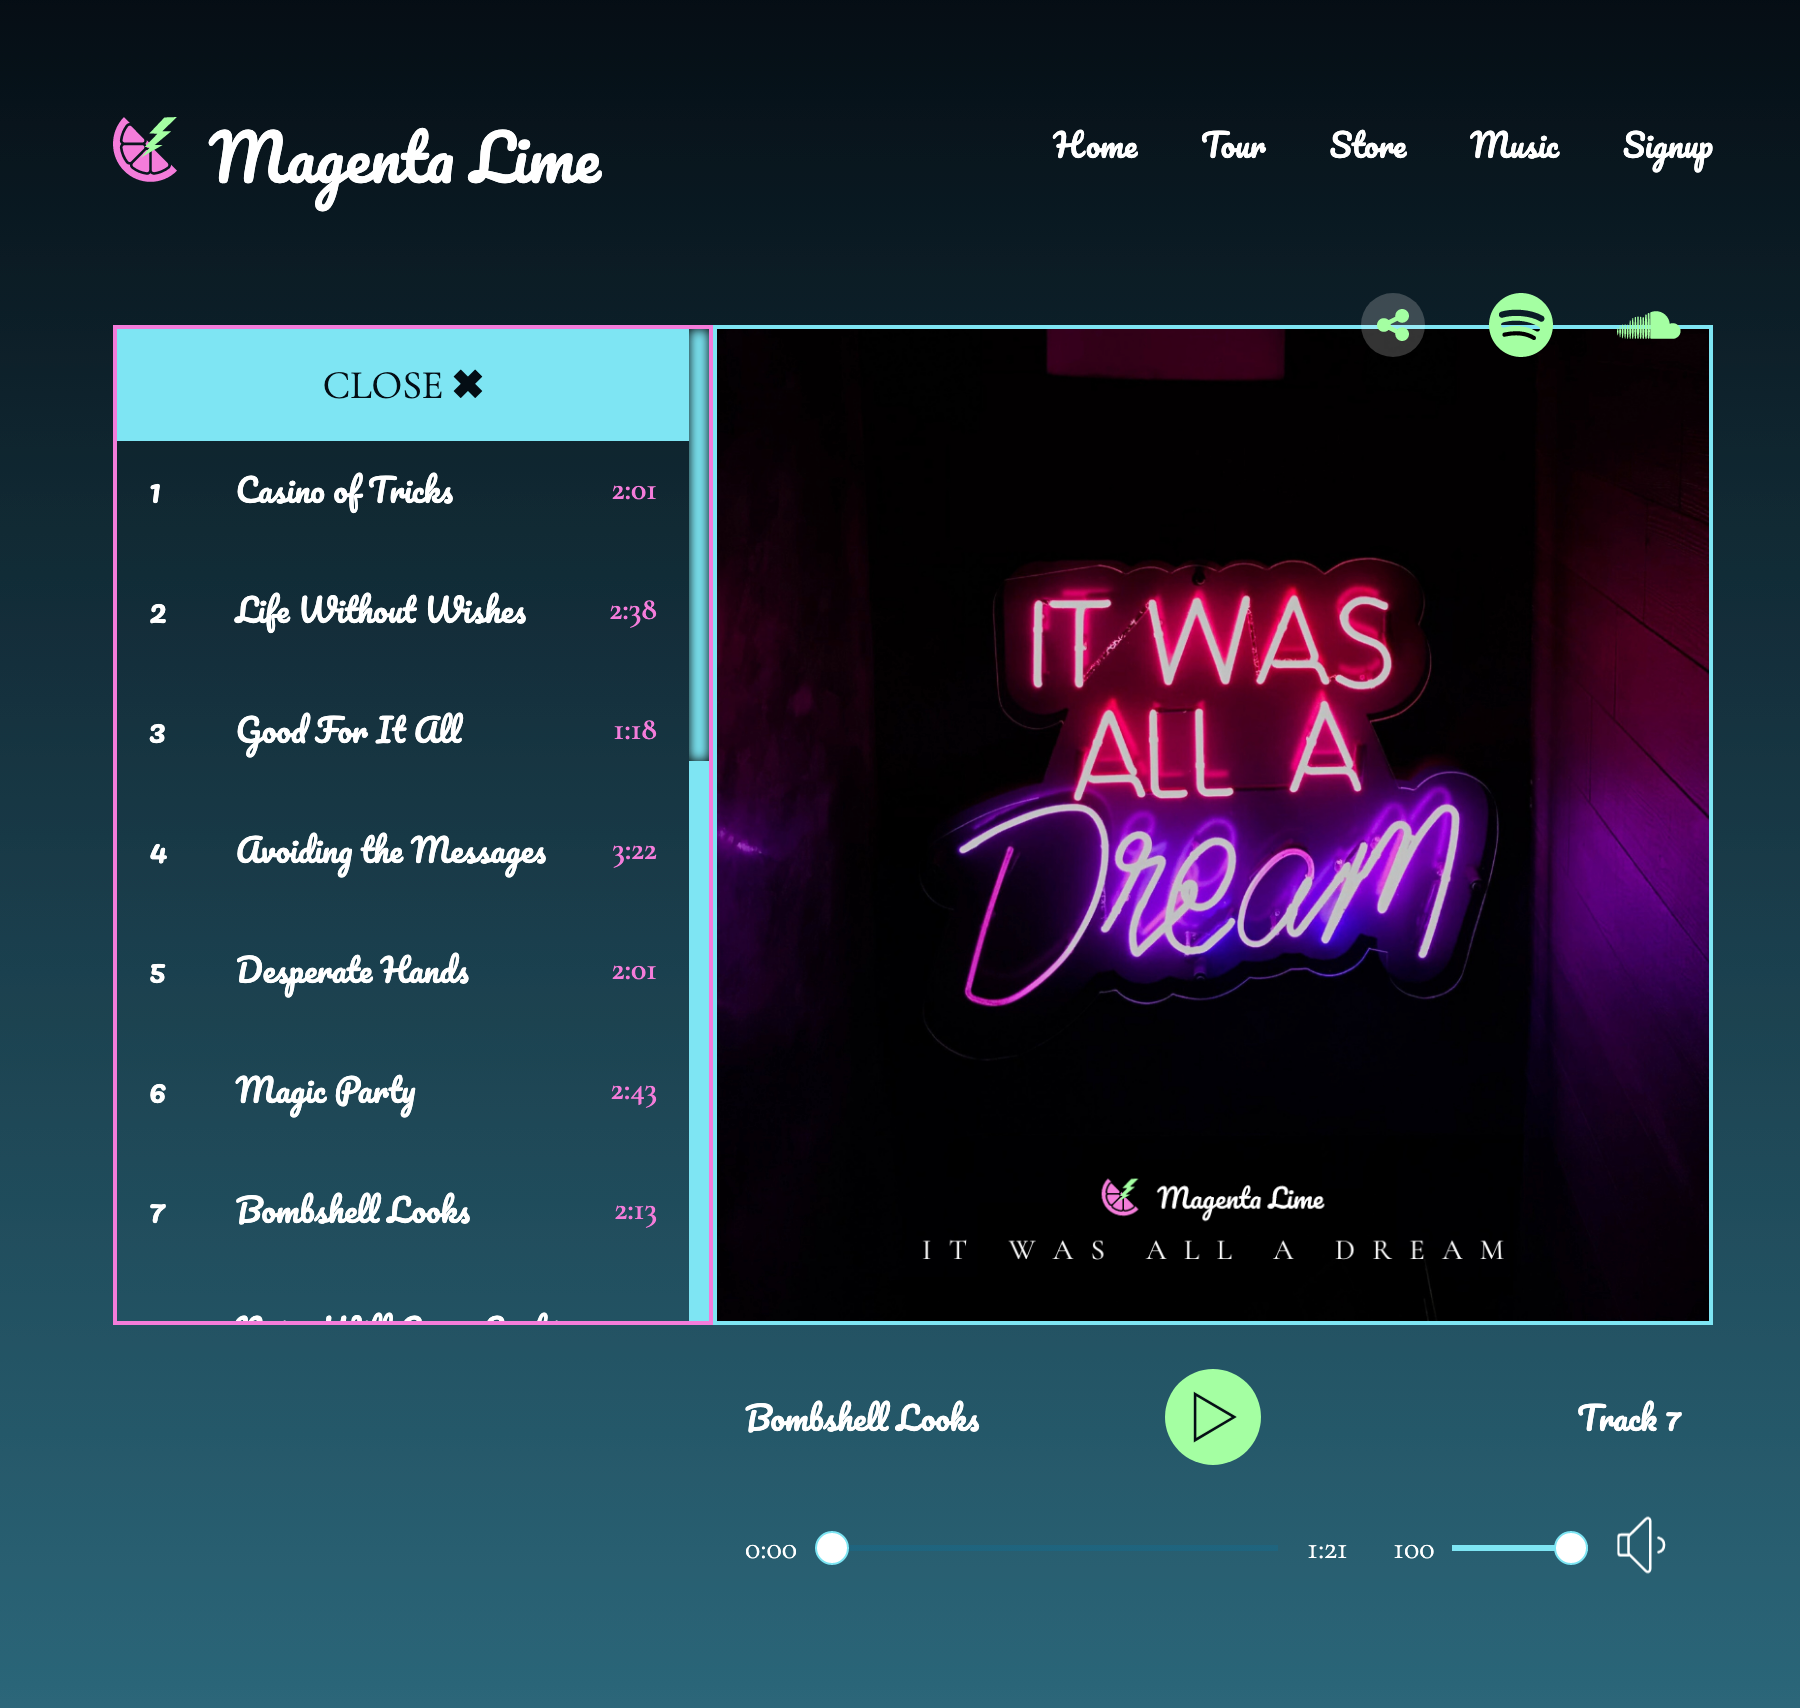 Difficult design, tablet and desktop tracklist open next to the audio player